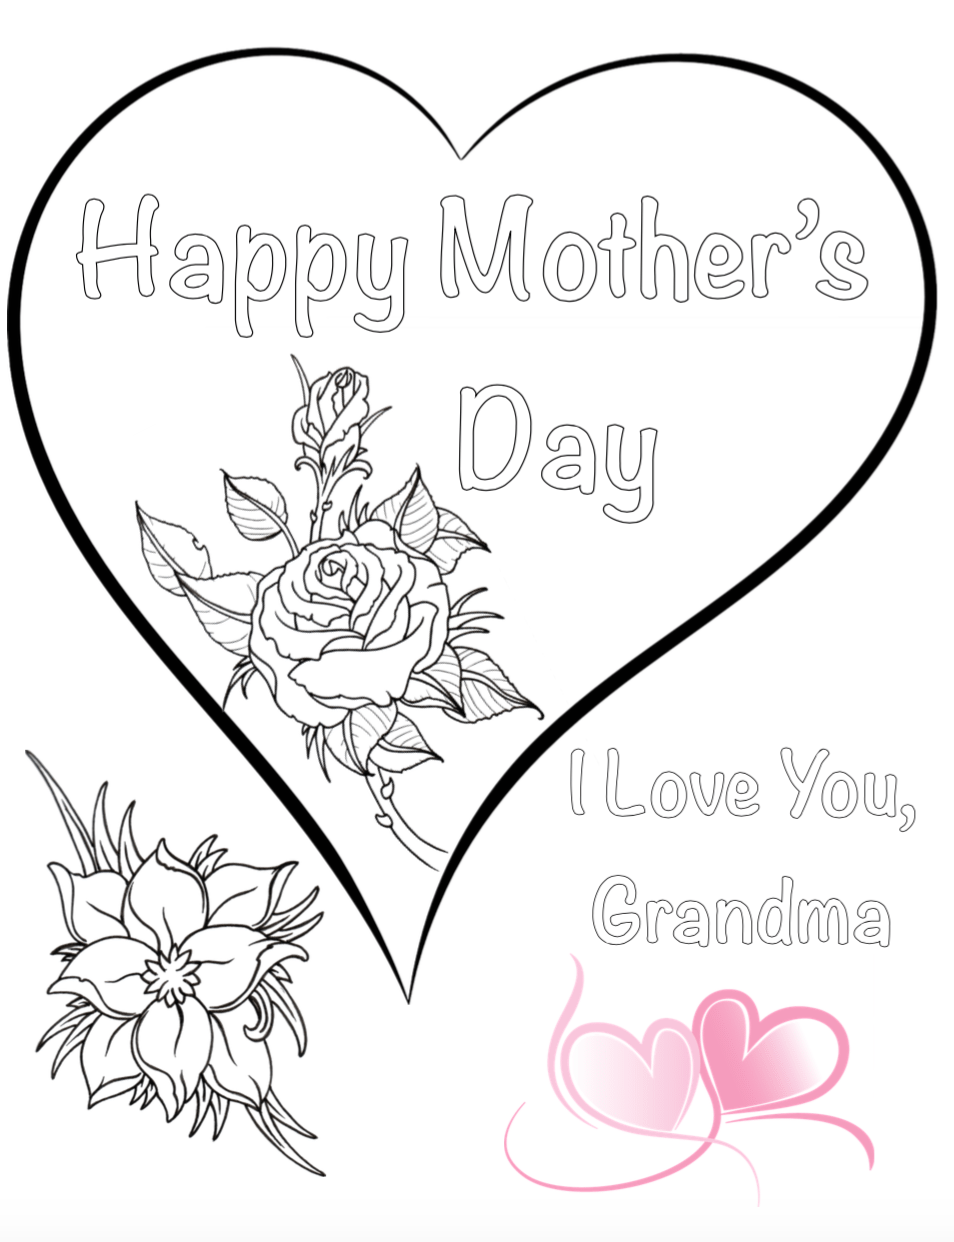 Free Printable Mother's Day Coloring Pages: 4 different ...